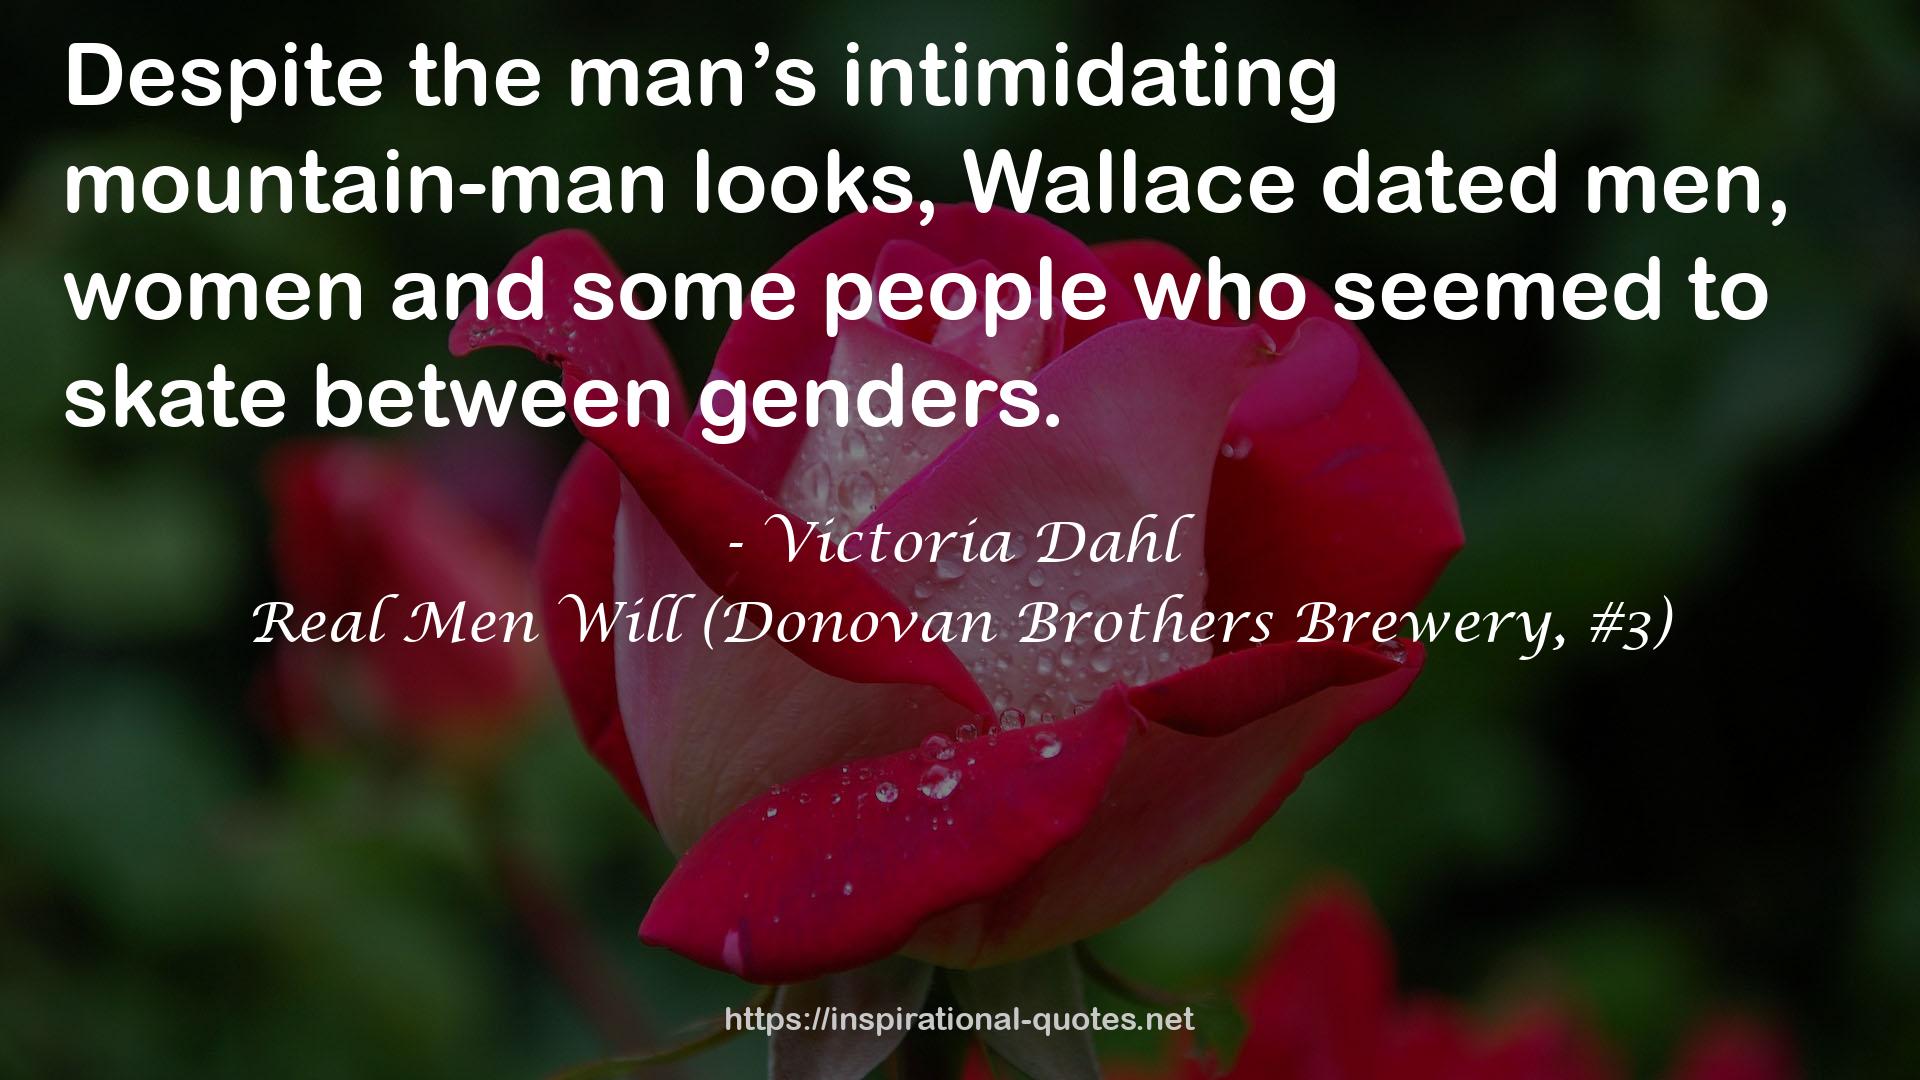 Real Men Will (Donovan Brothers Brewery, #3) QUOTES